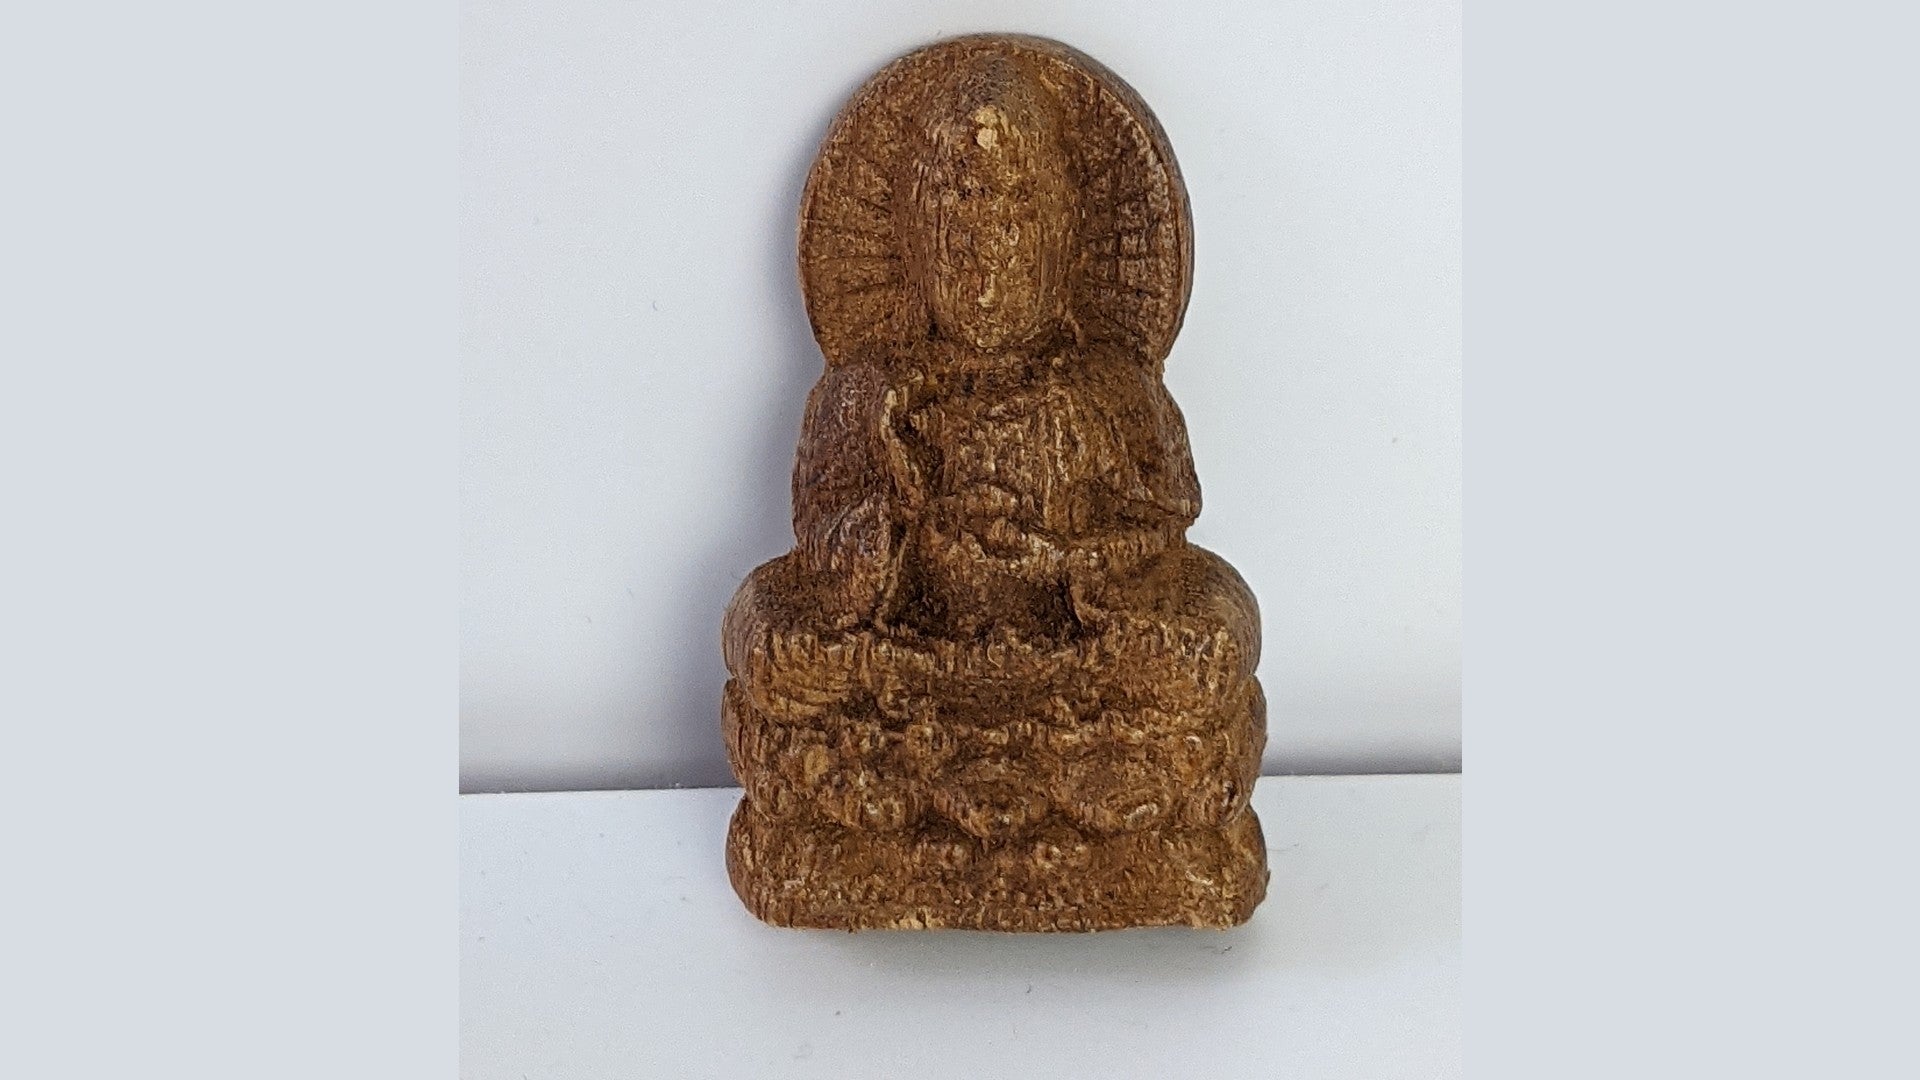 Cultivated Agarwood Pendant Guan Yin The Goddess of Mercy and Mi Le Laughing Buddha - Guan Yin w 2.7g